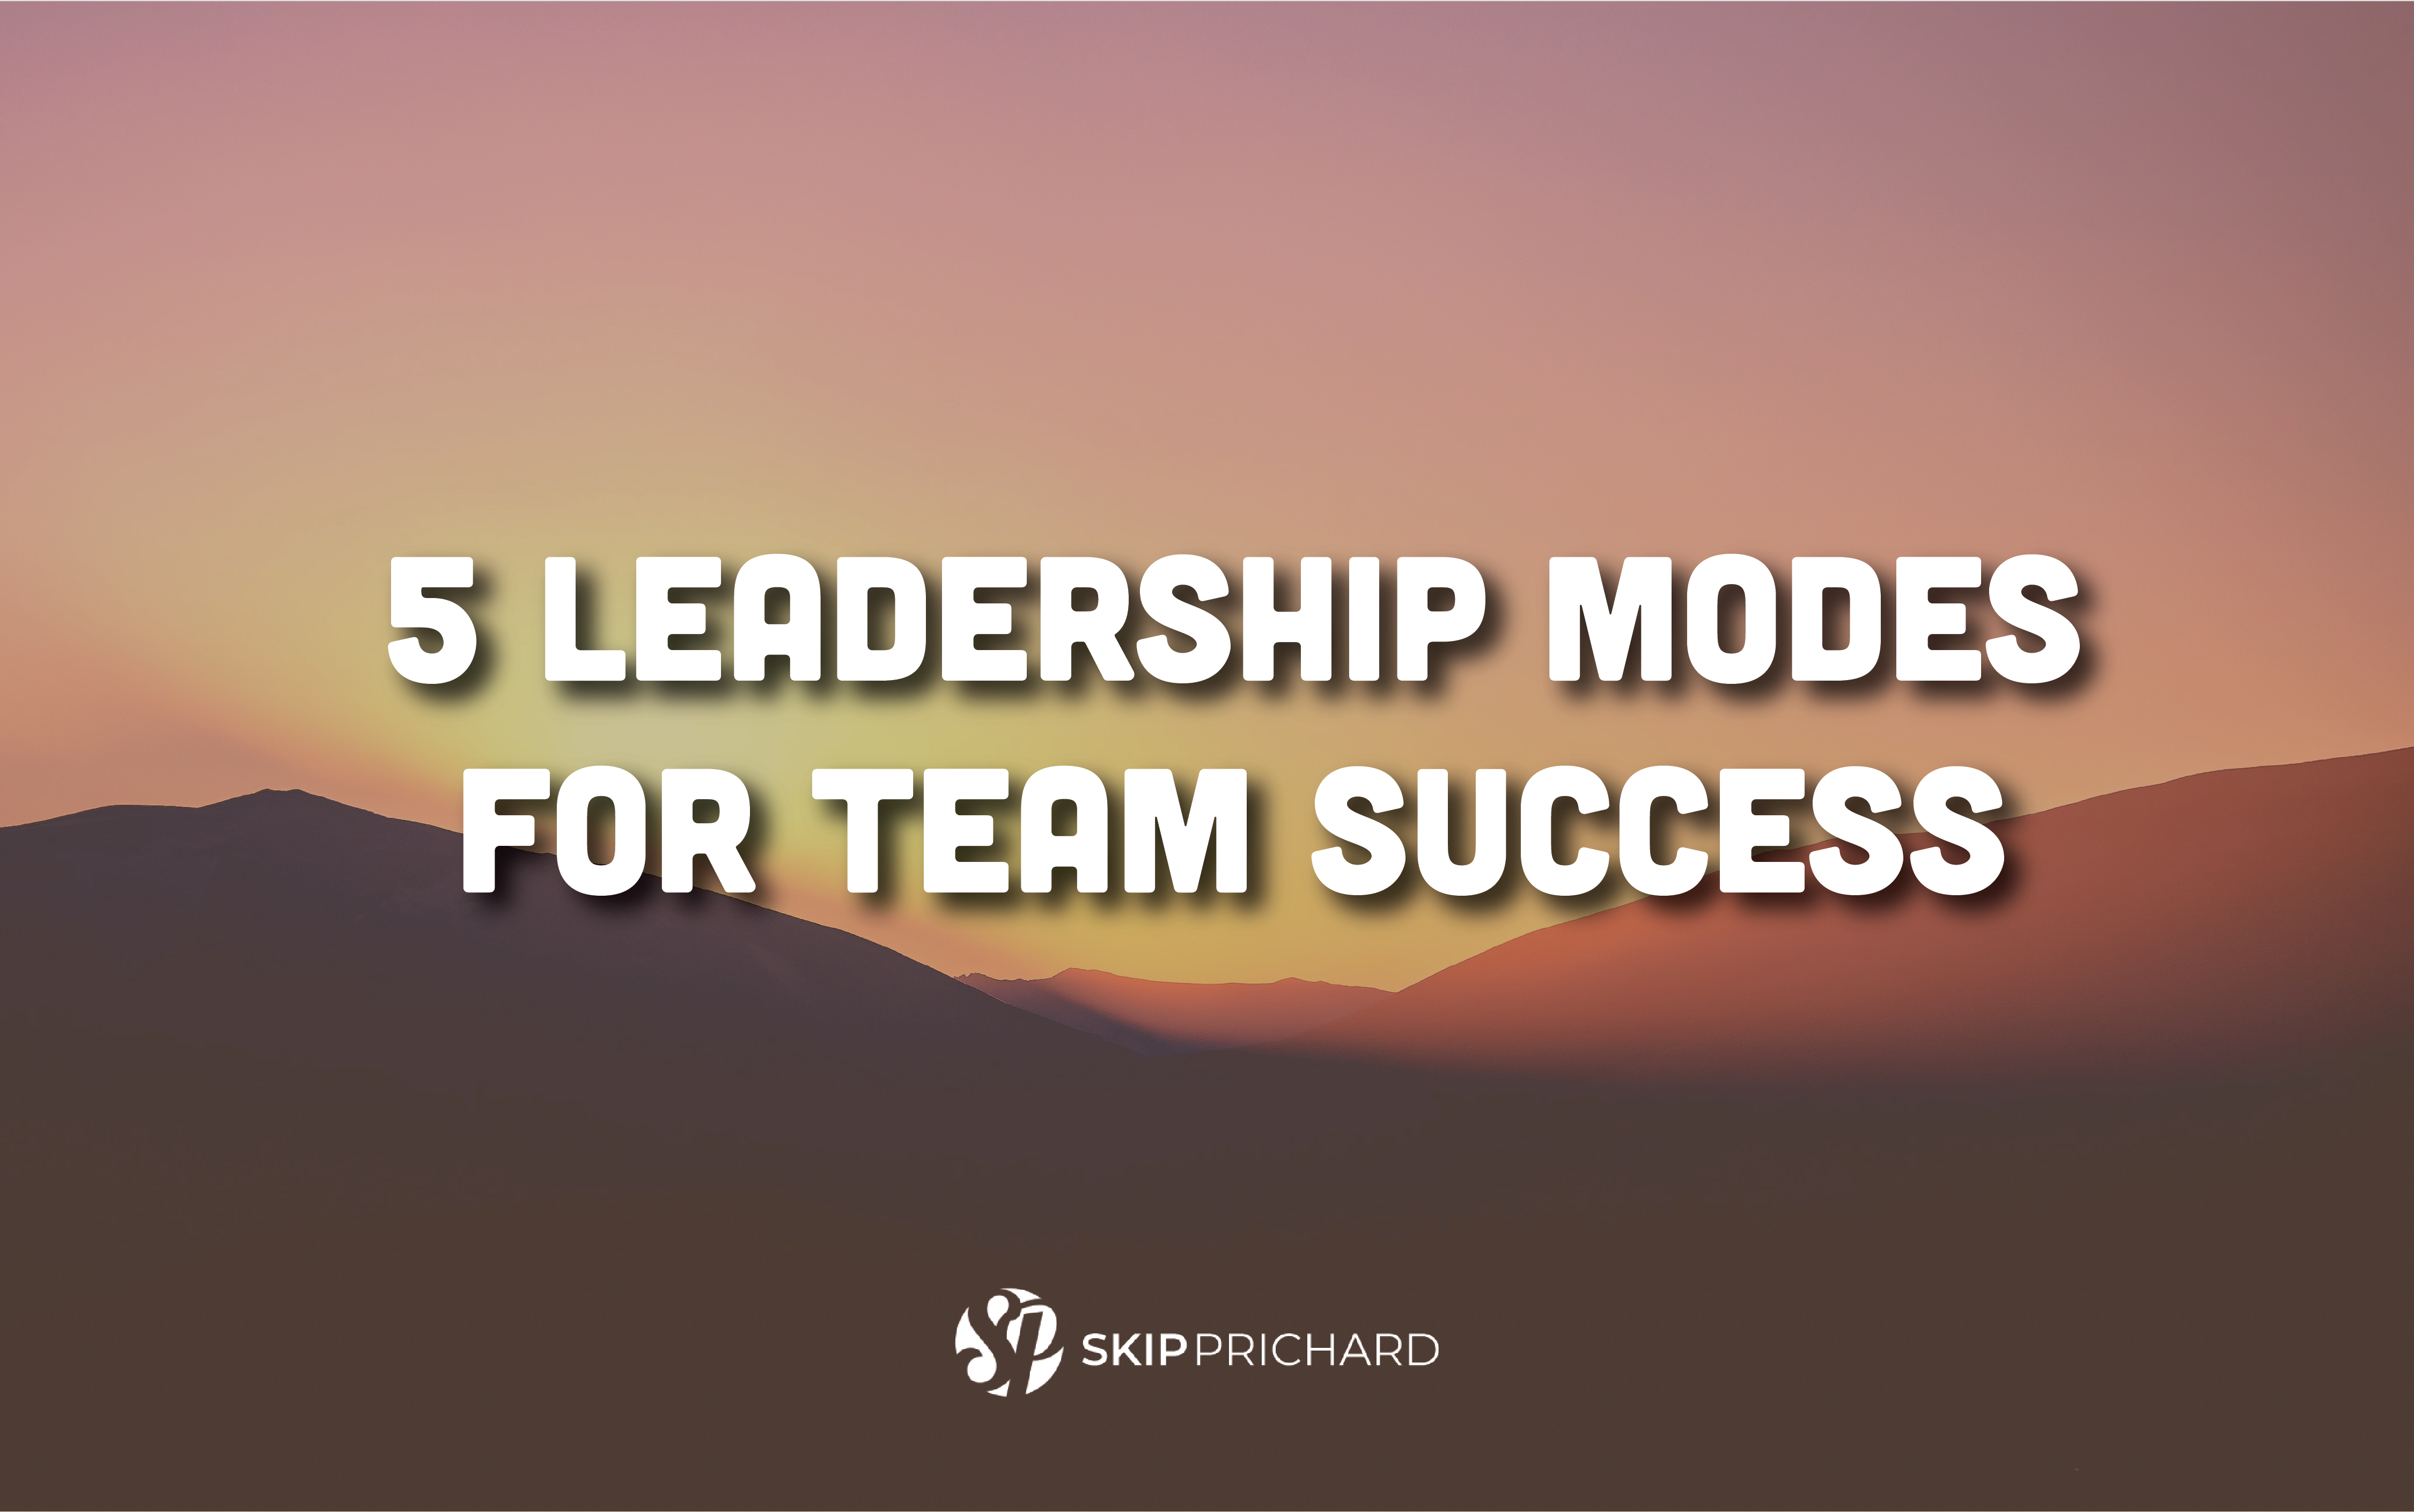 5 Leadership Modes for Team Success